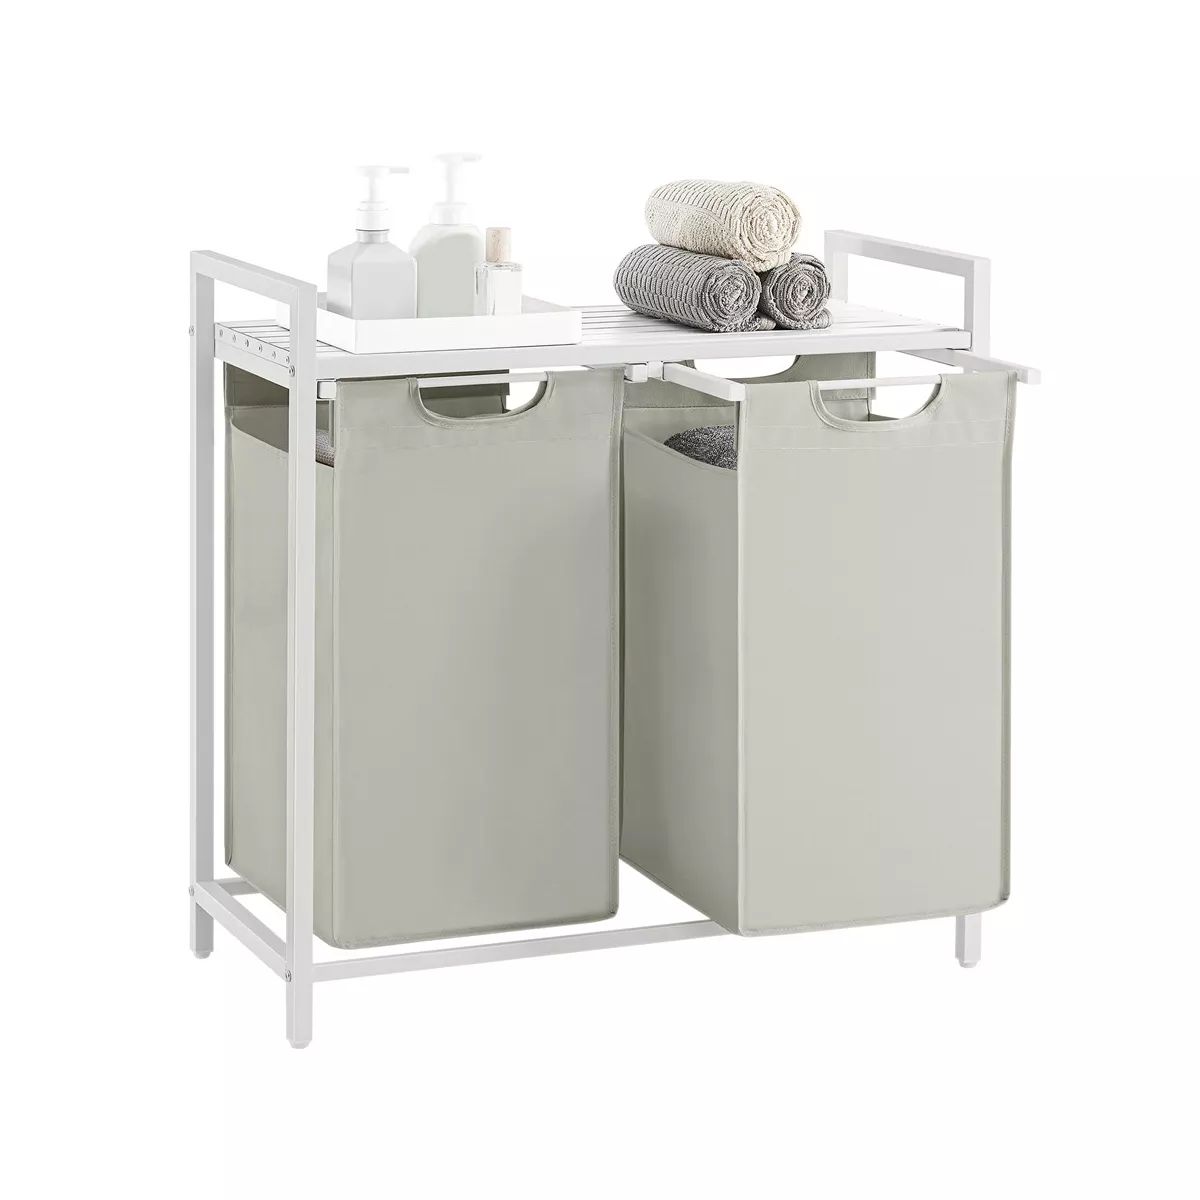 VASAGLE Laundry Hamper Laundry Basket with 2 Pull-Out Bags Laundry Sorter with Shelf | Target